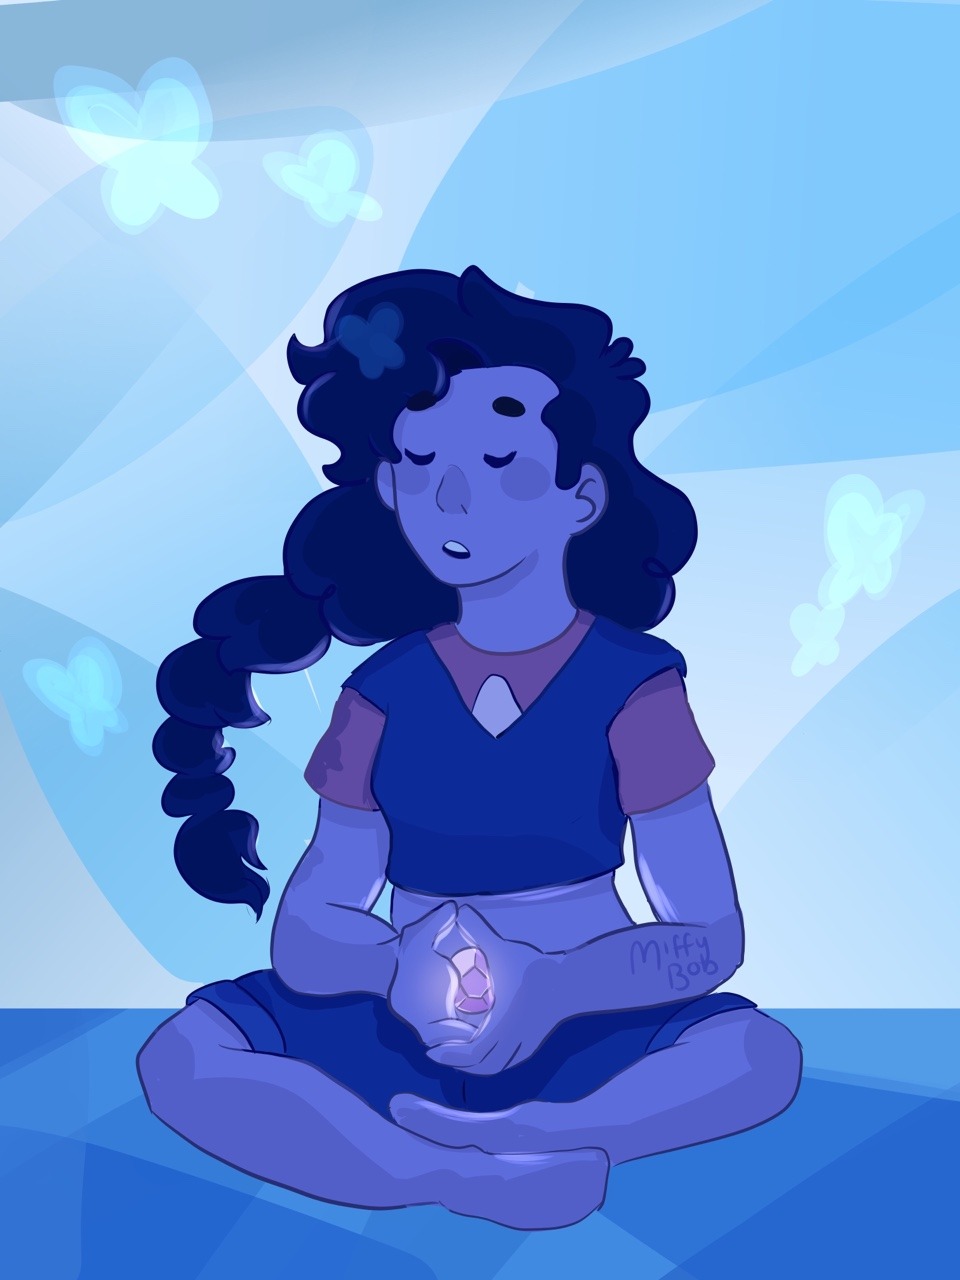 “Take a moment, remind yourself, To take a moment and find yourself” - - quick stevonnie to remind y’all to take a wee bit of chill time if ur getting stressed from exams n all that- just relax for a...